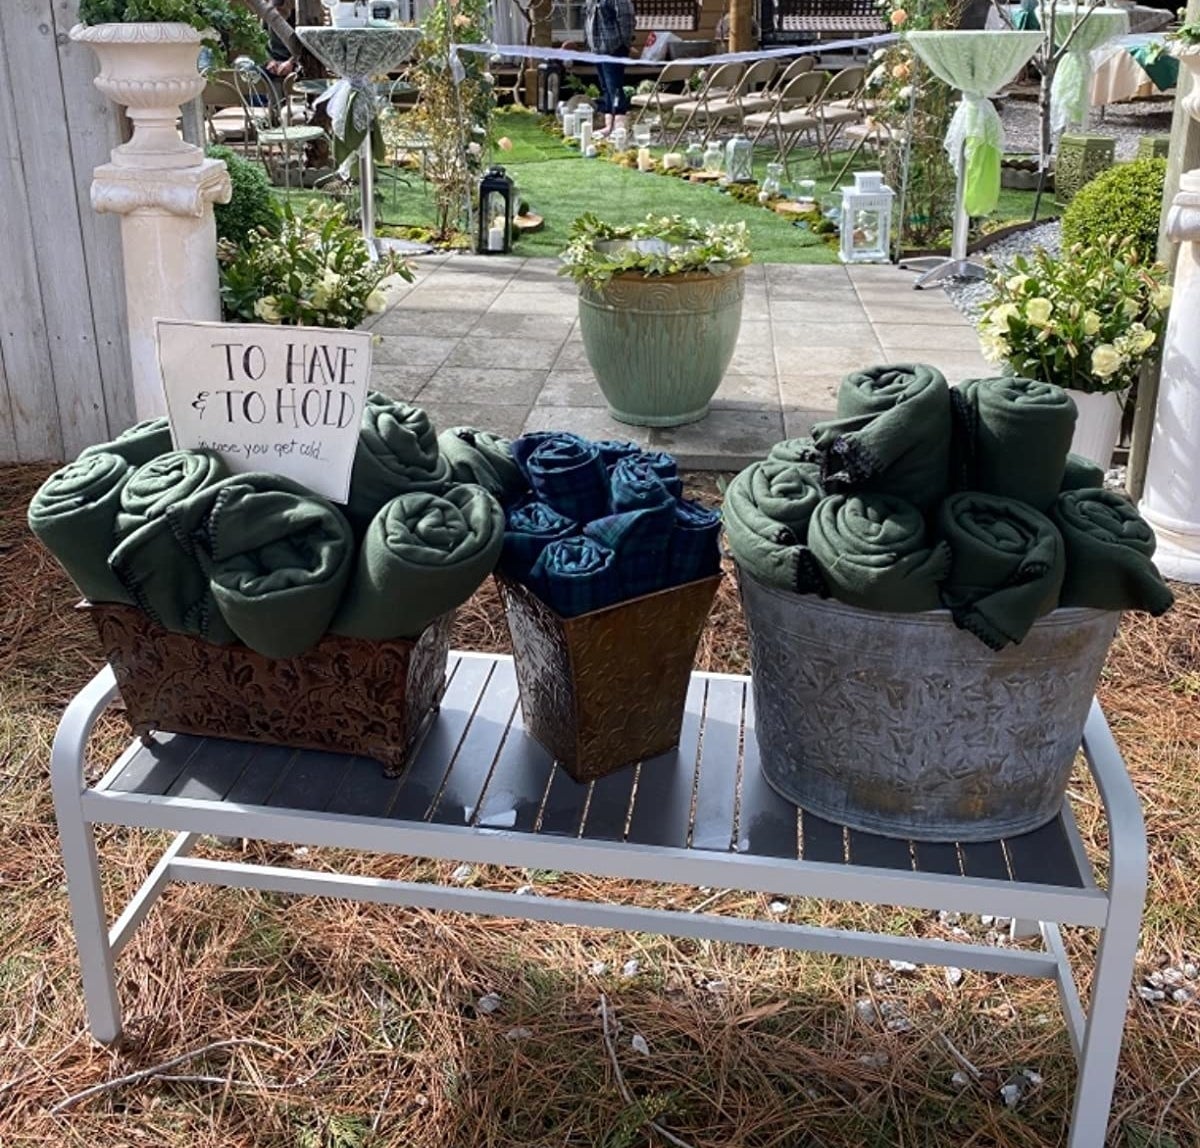 Dark green and navy blue blankets in baskets outside on a bench with a sign that says &quot;to have and to cold, in case you get cold&quot;